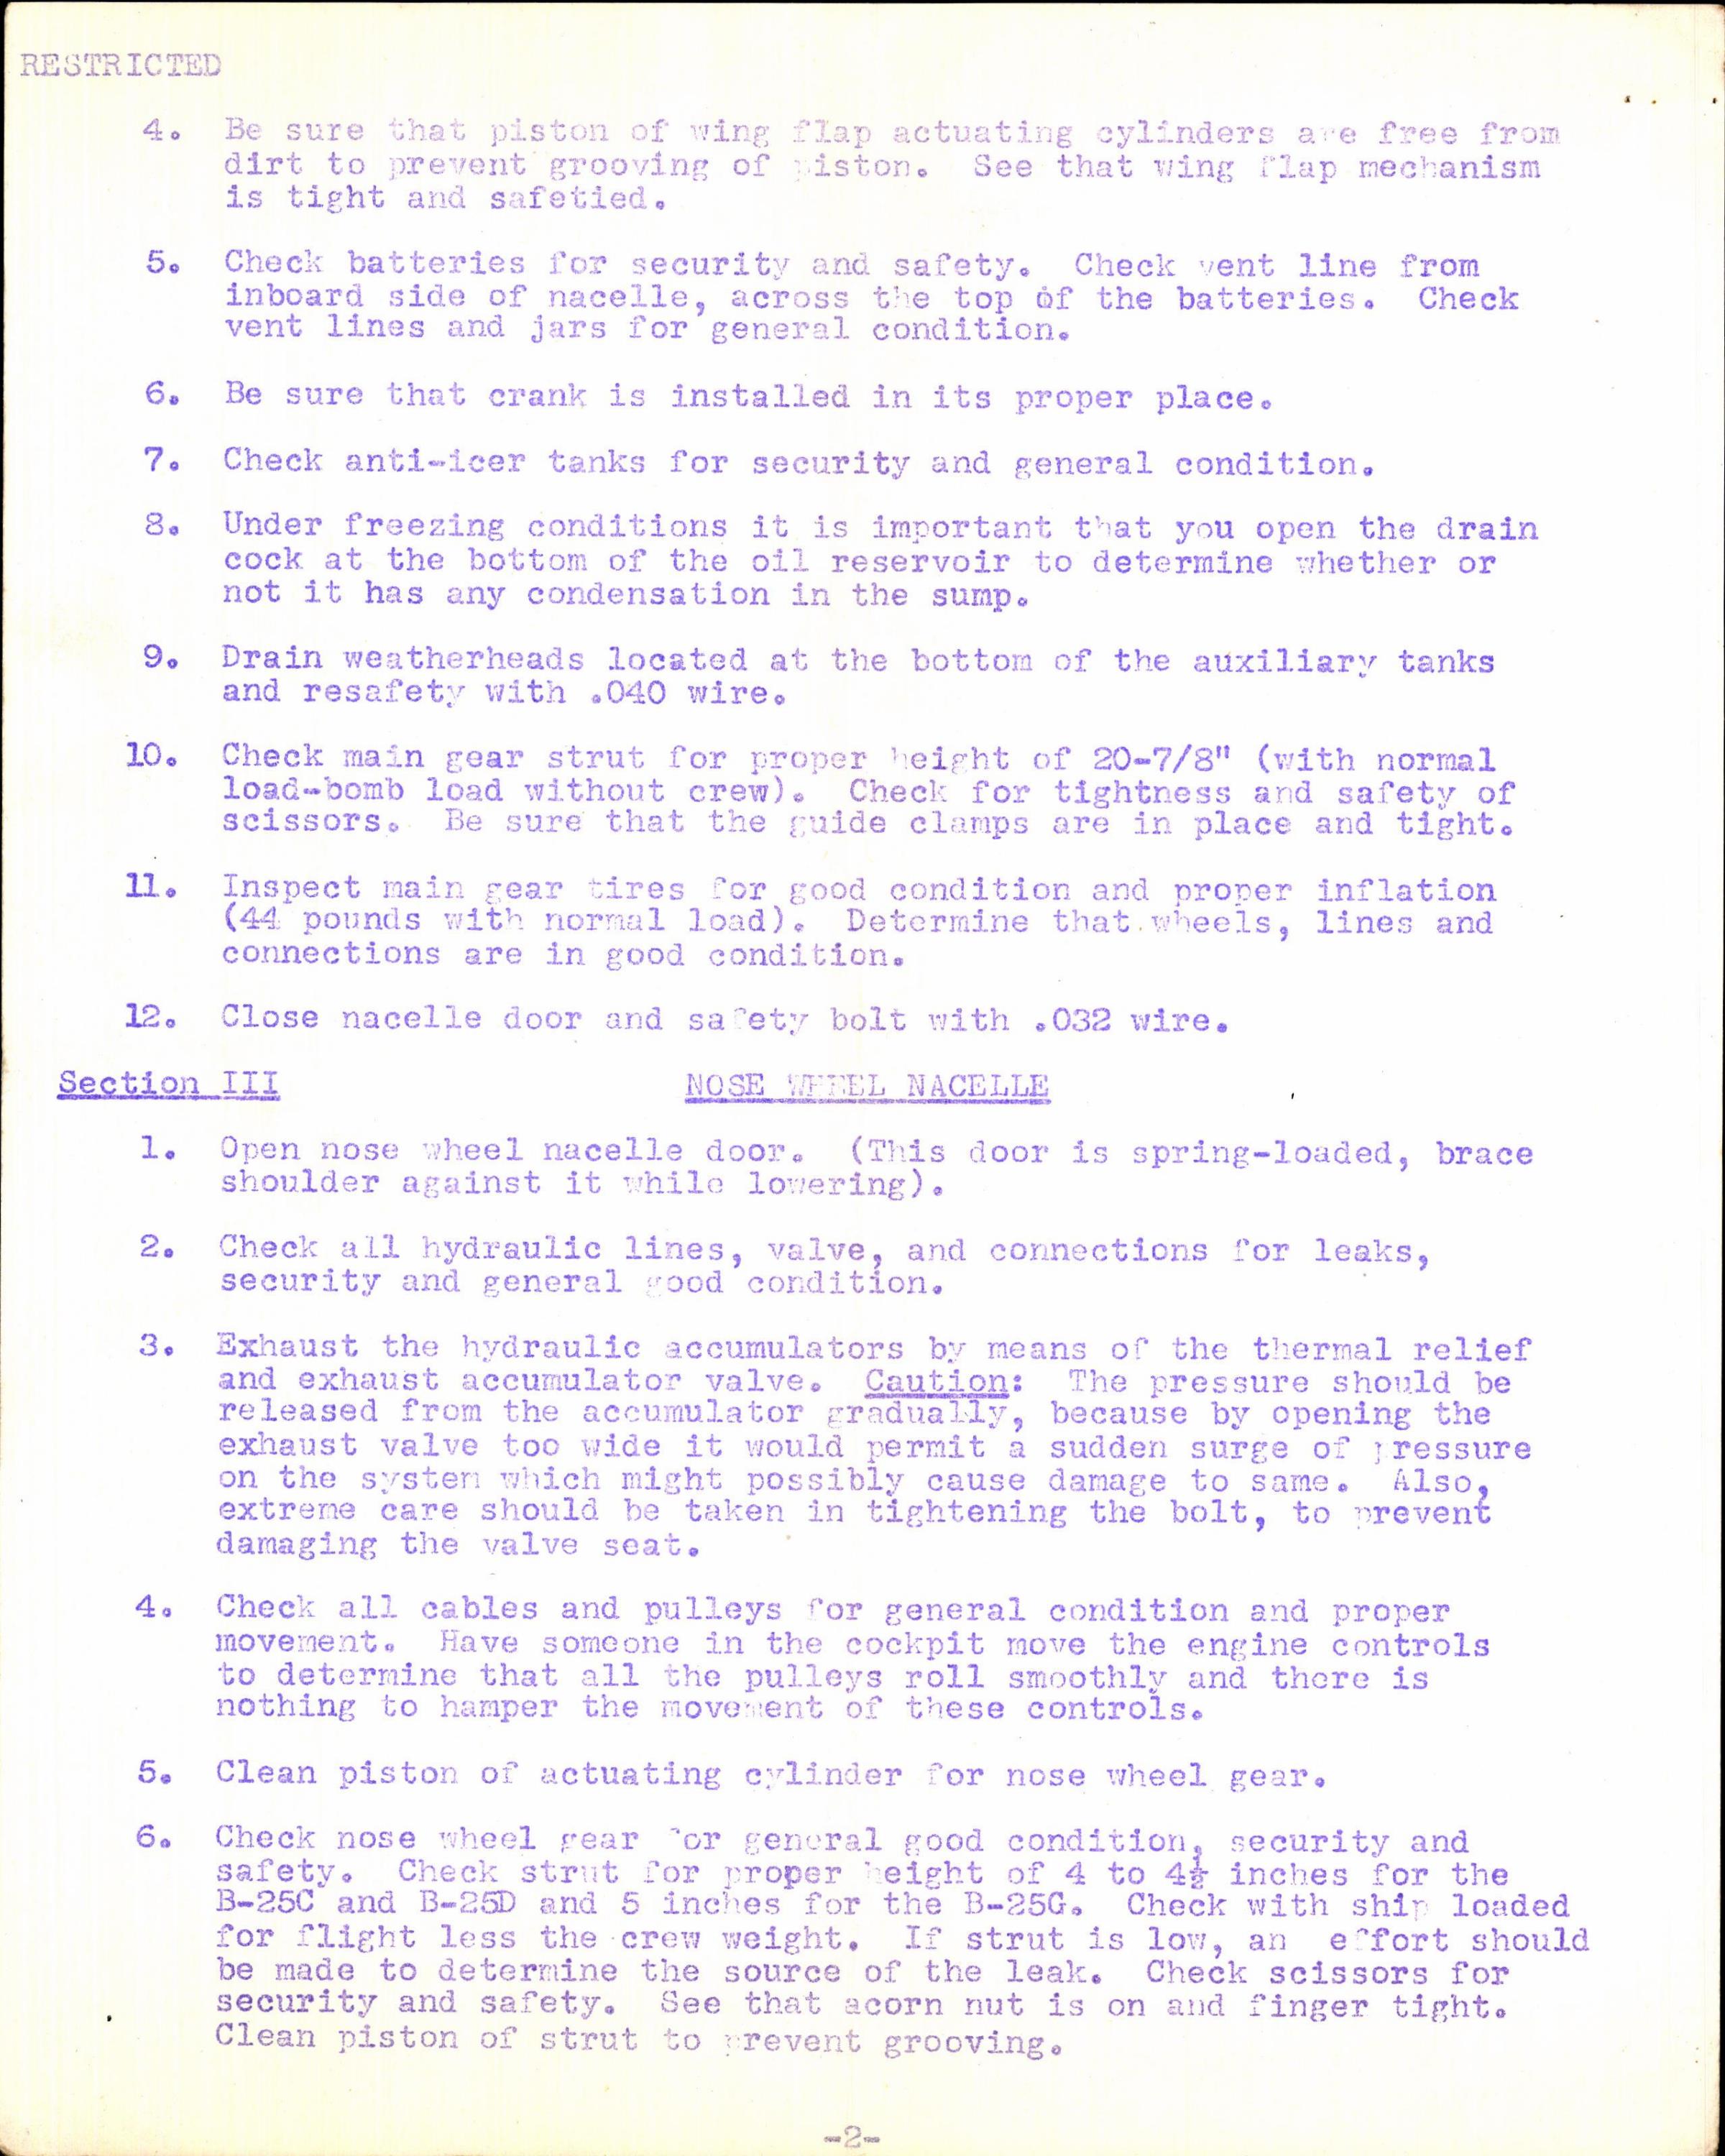 Sample page 4 from AirCorps Library document: Pre-Flight and Daily Inspection for B-25